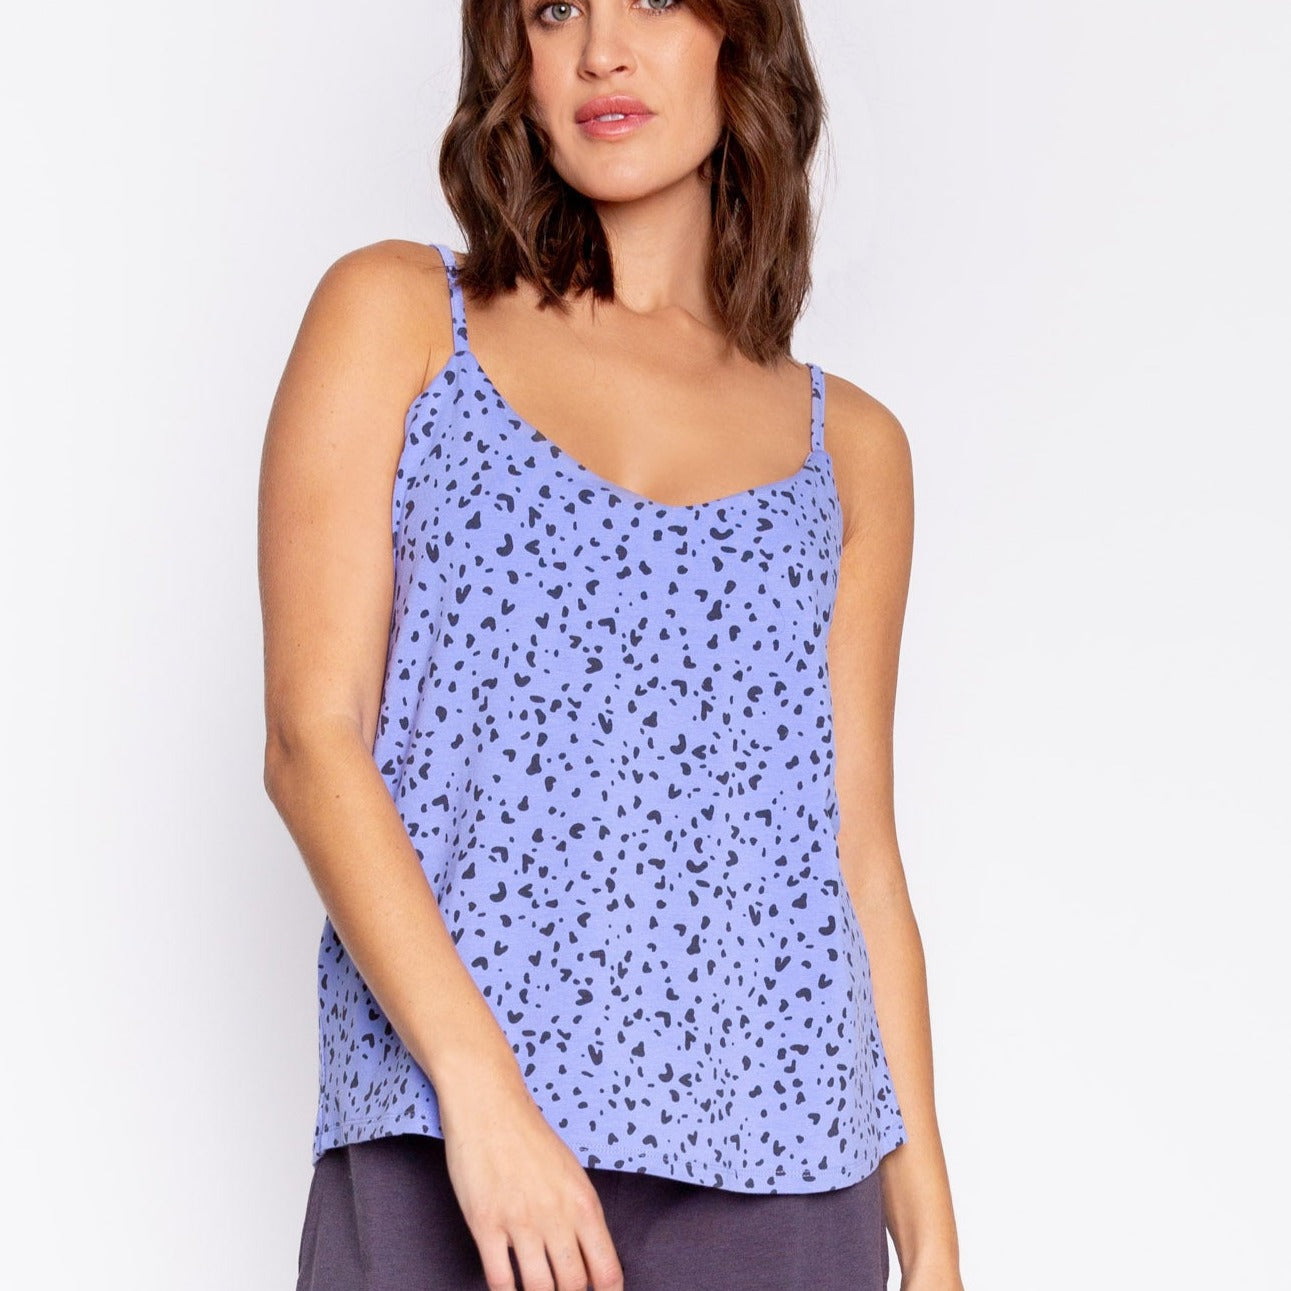 Molly Modal Cami - RGMMC - Periwinkle/Charcoal